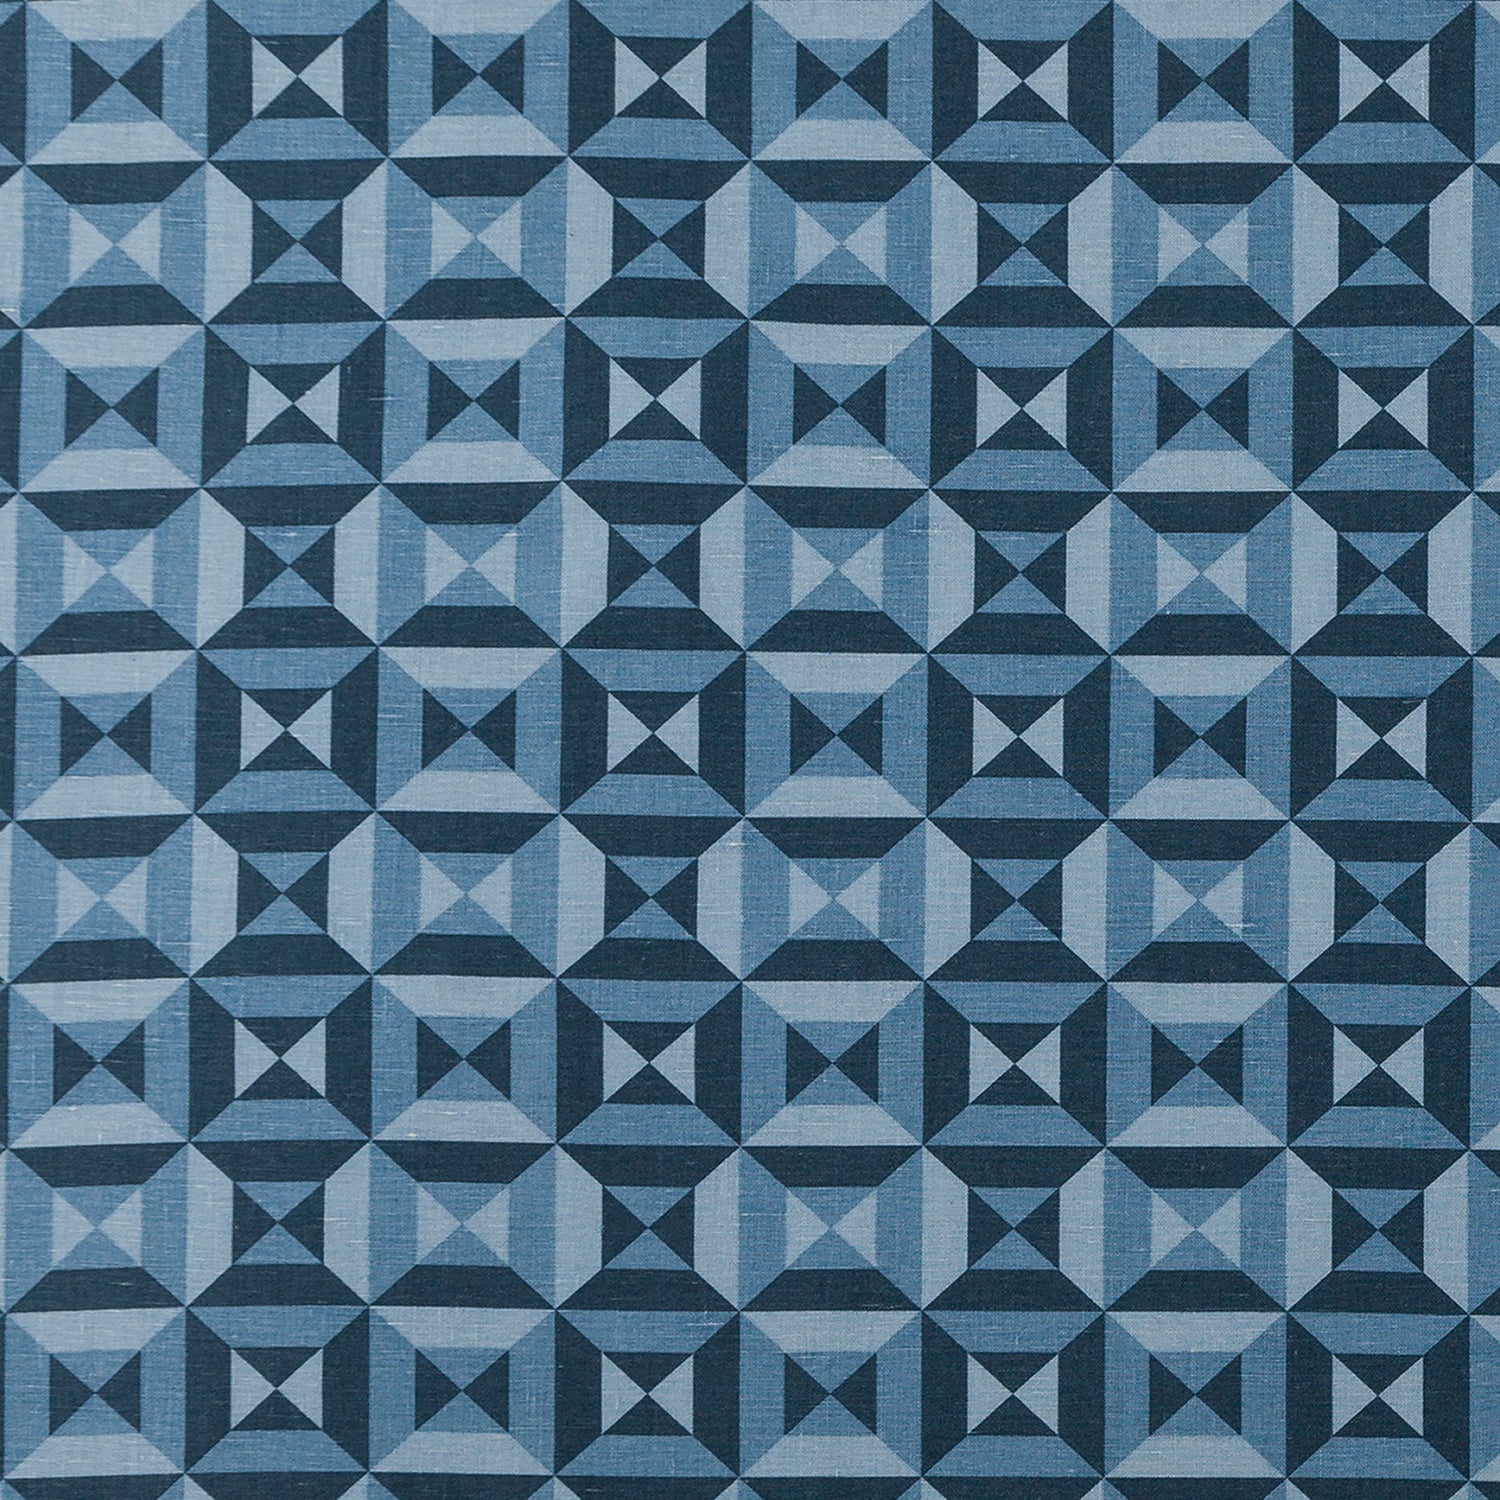 Fabric in a geometric grid print in shades of blue and navy.